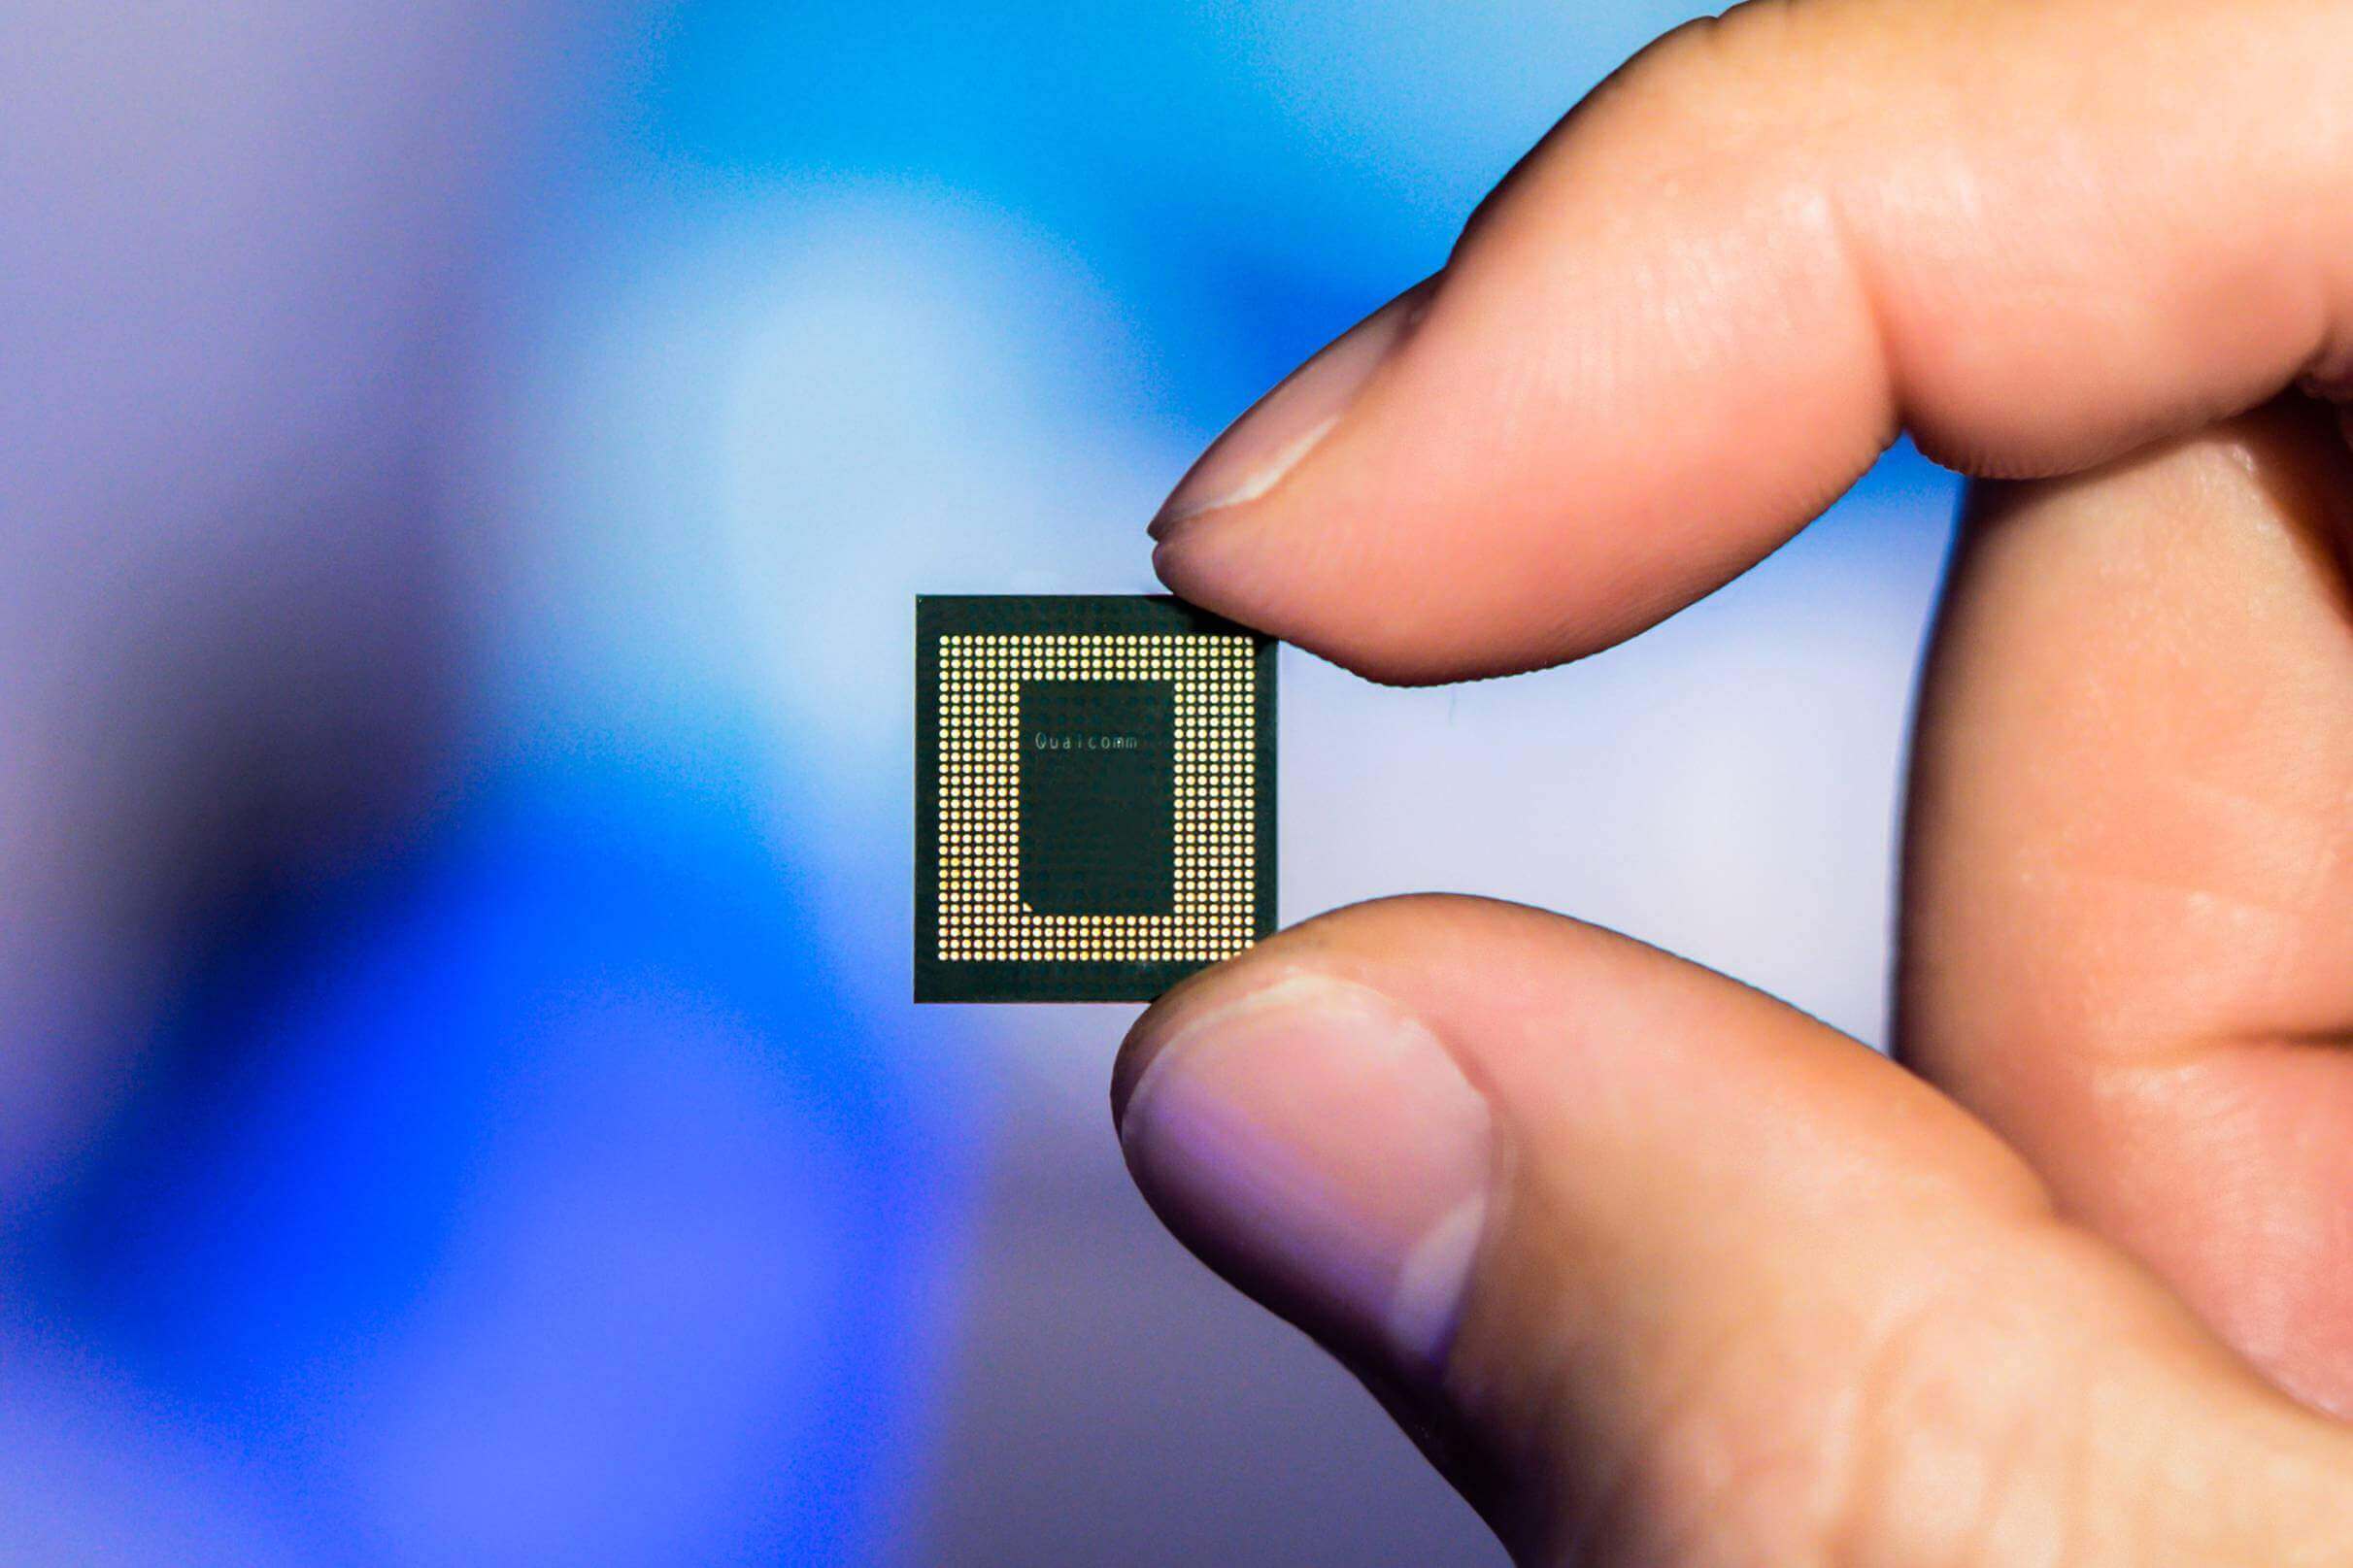 Qualcomm's first Wi-Fi 6E chips are aimed at phones and routers